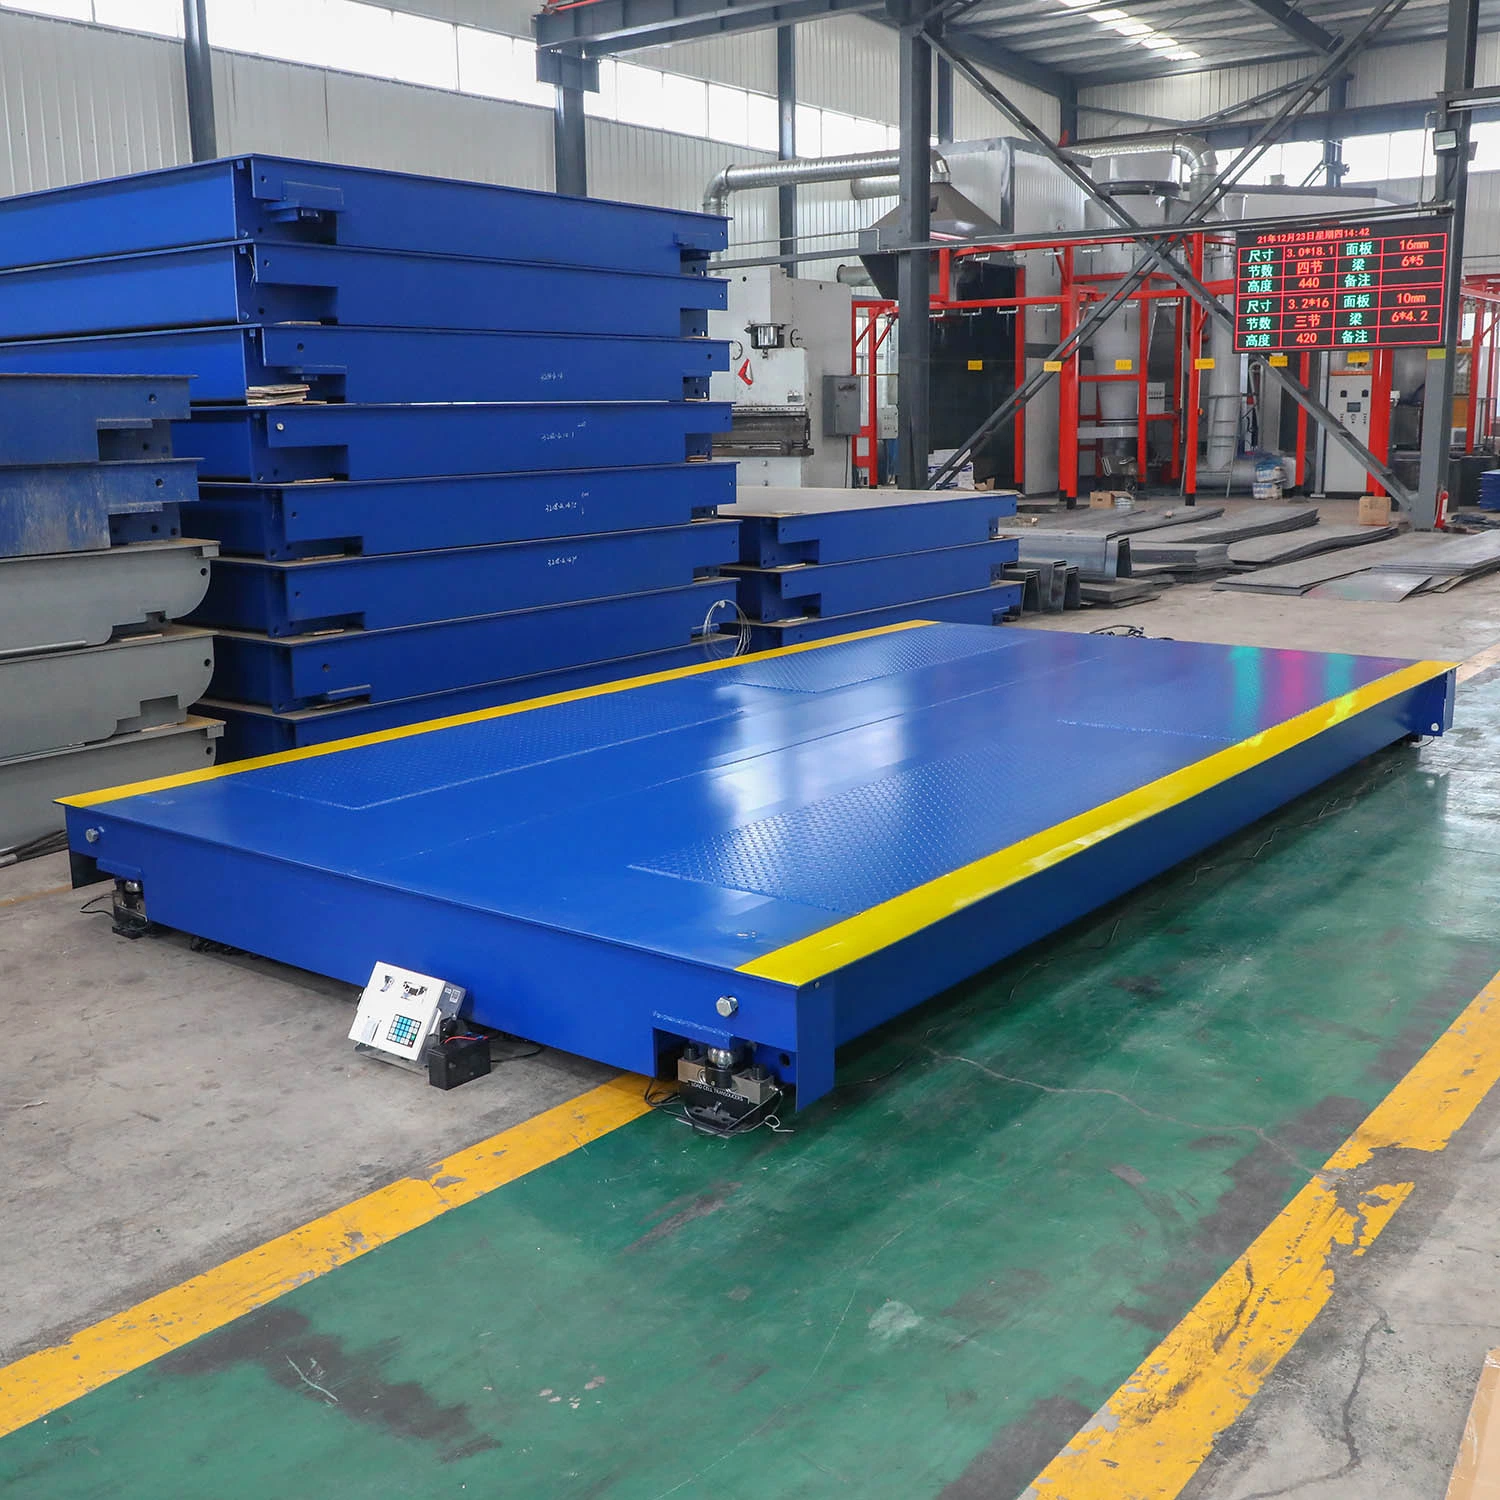 Heavy Duty Truck Weighing Scale 120ton Electronic Vehicle Weighbridge 3X24m From Original Factory